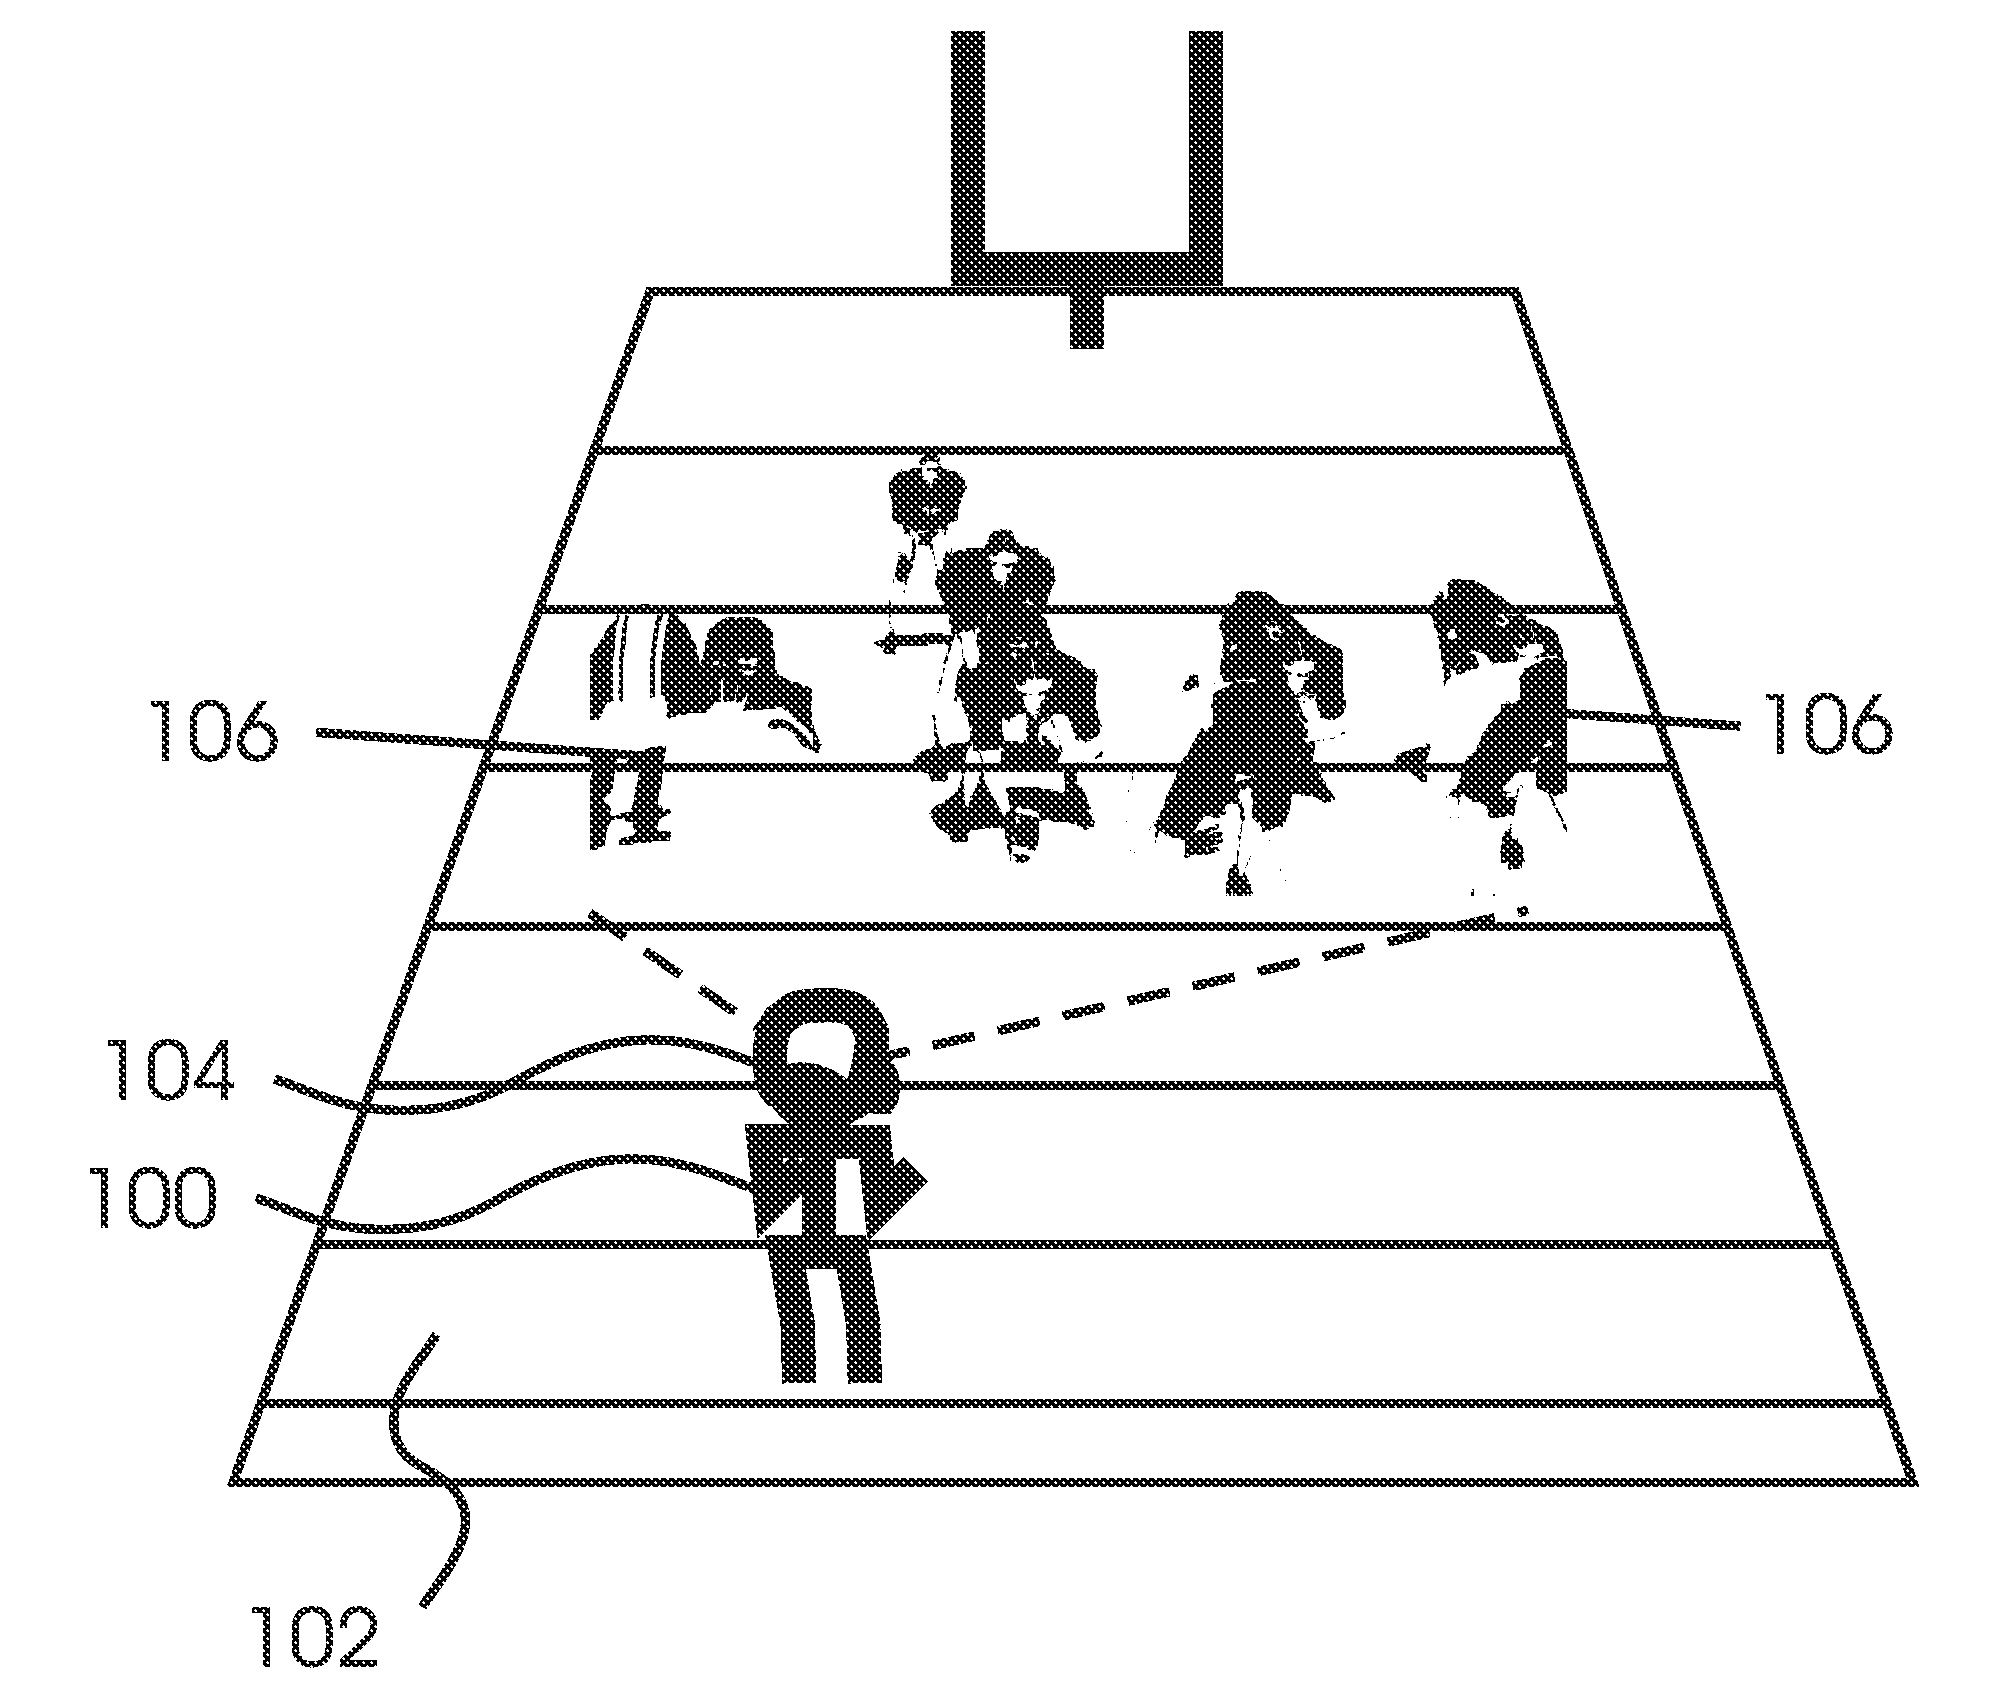 Apparatus and method for on-field virtual reality simulation of US football and other sports